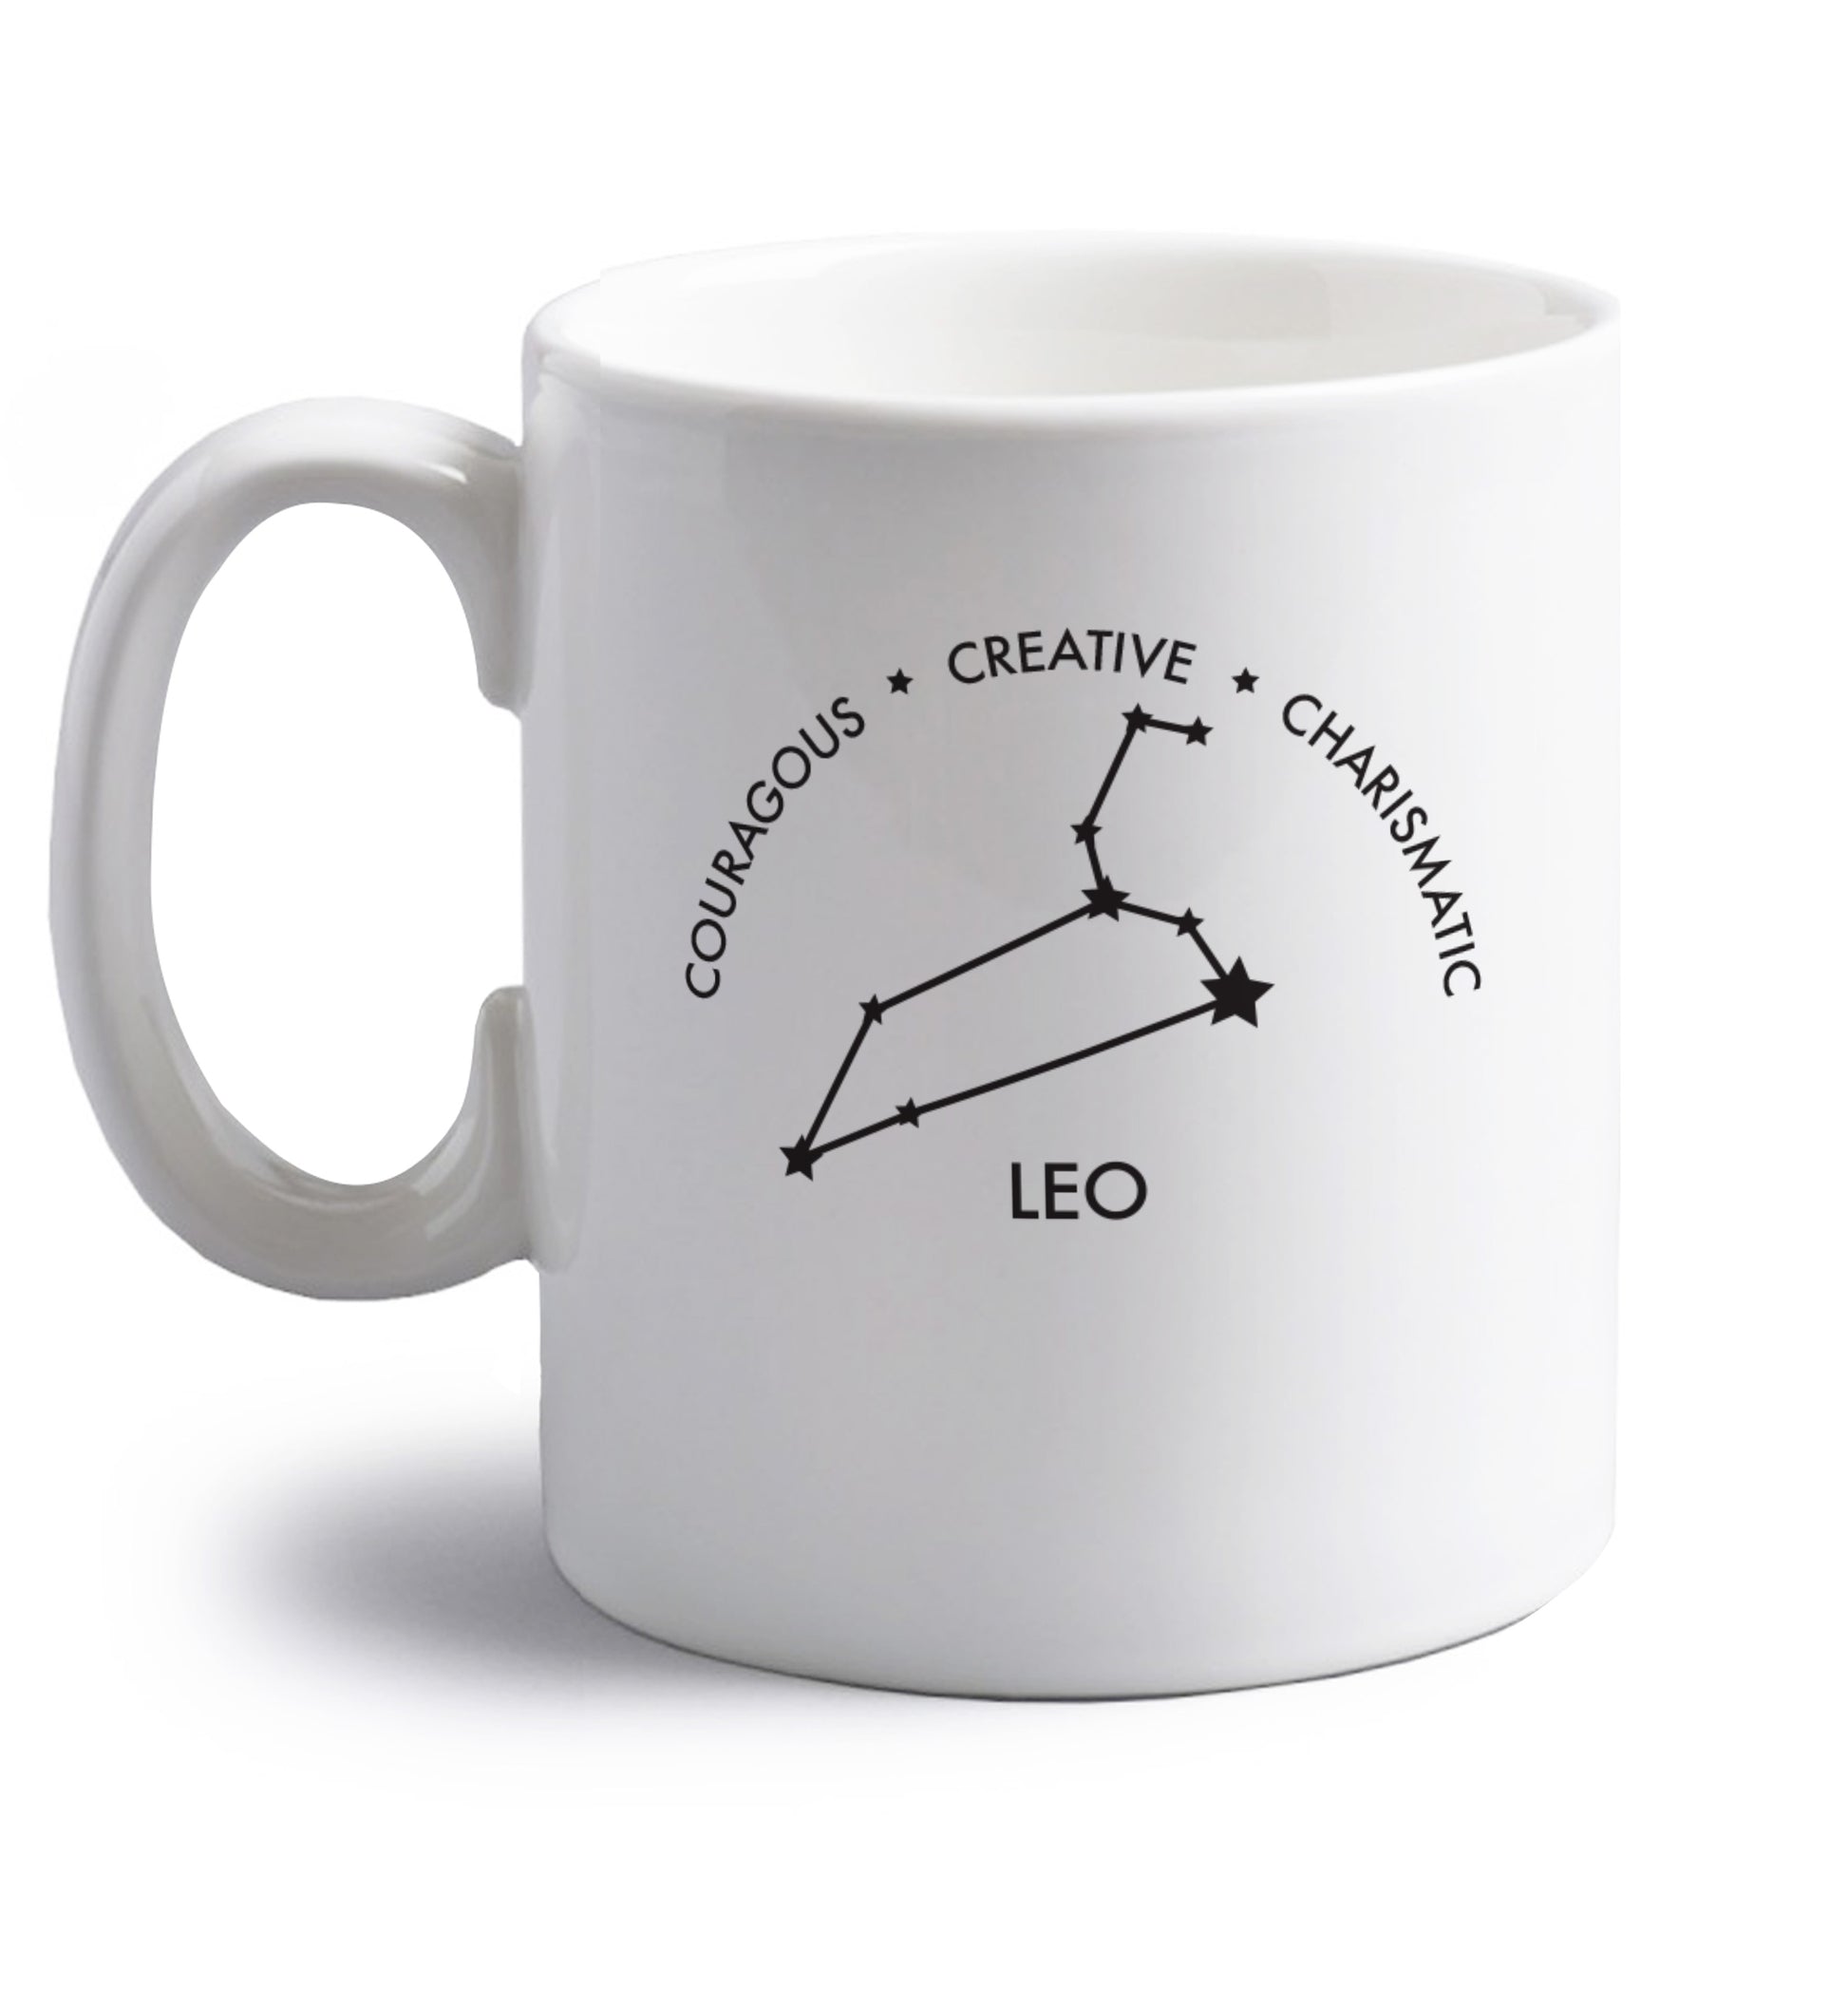 Leo - Courageous | Creative | Charismatic right handed white ceramic mug 